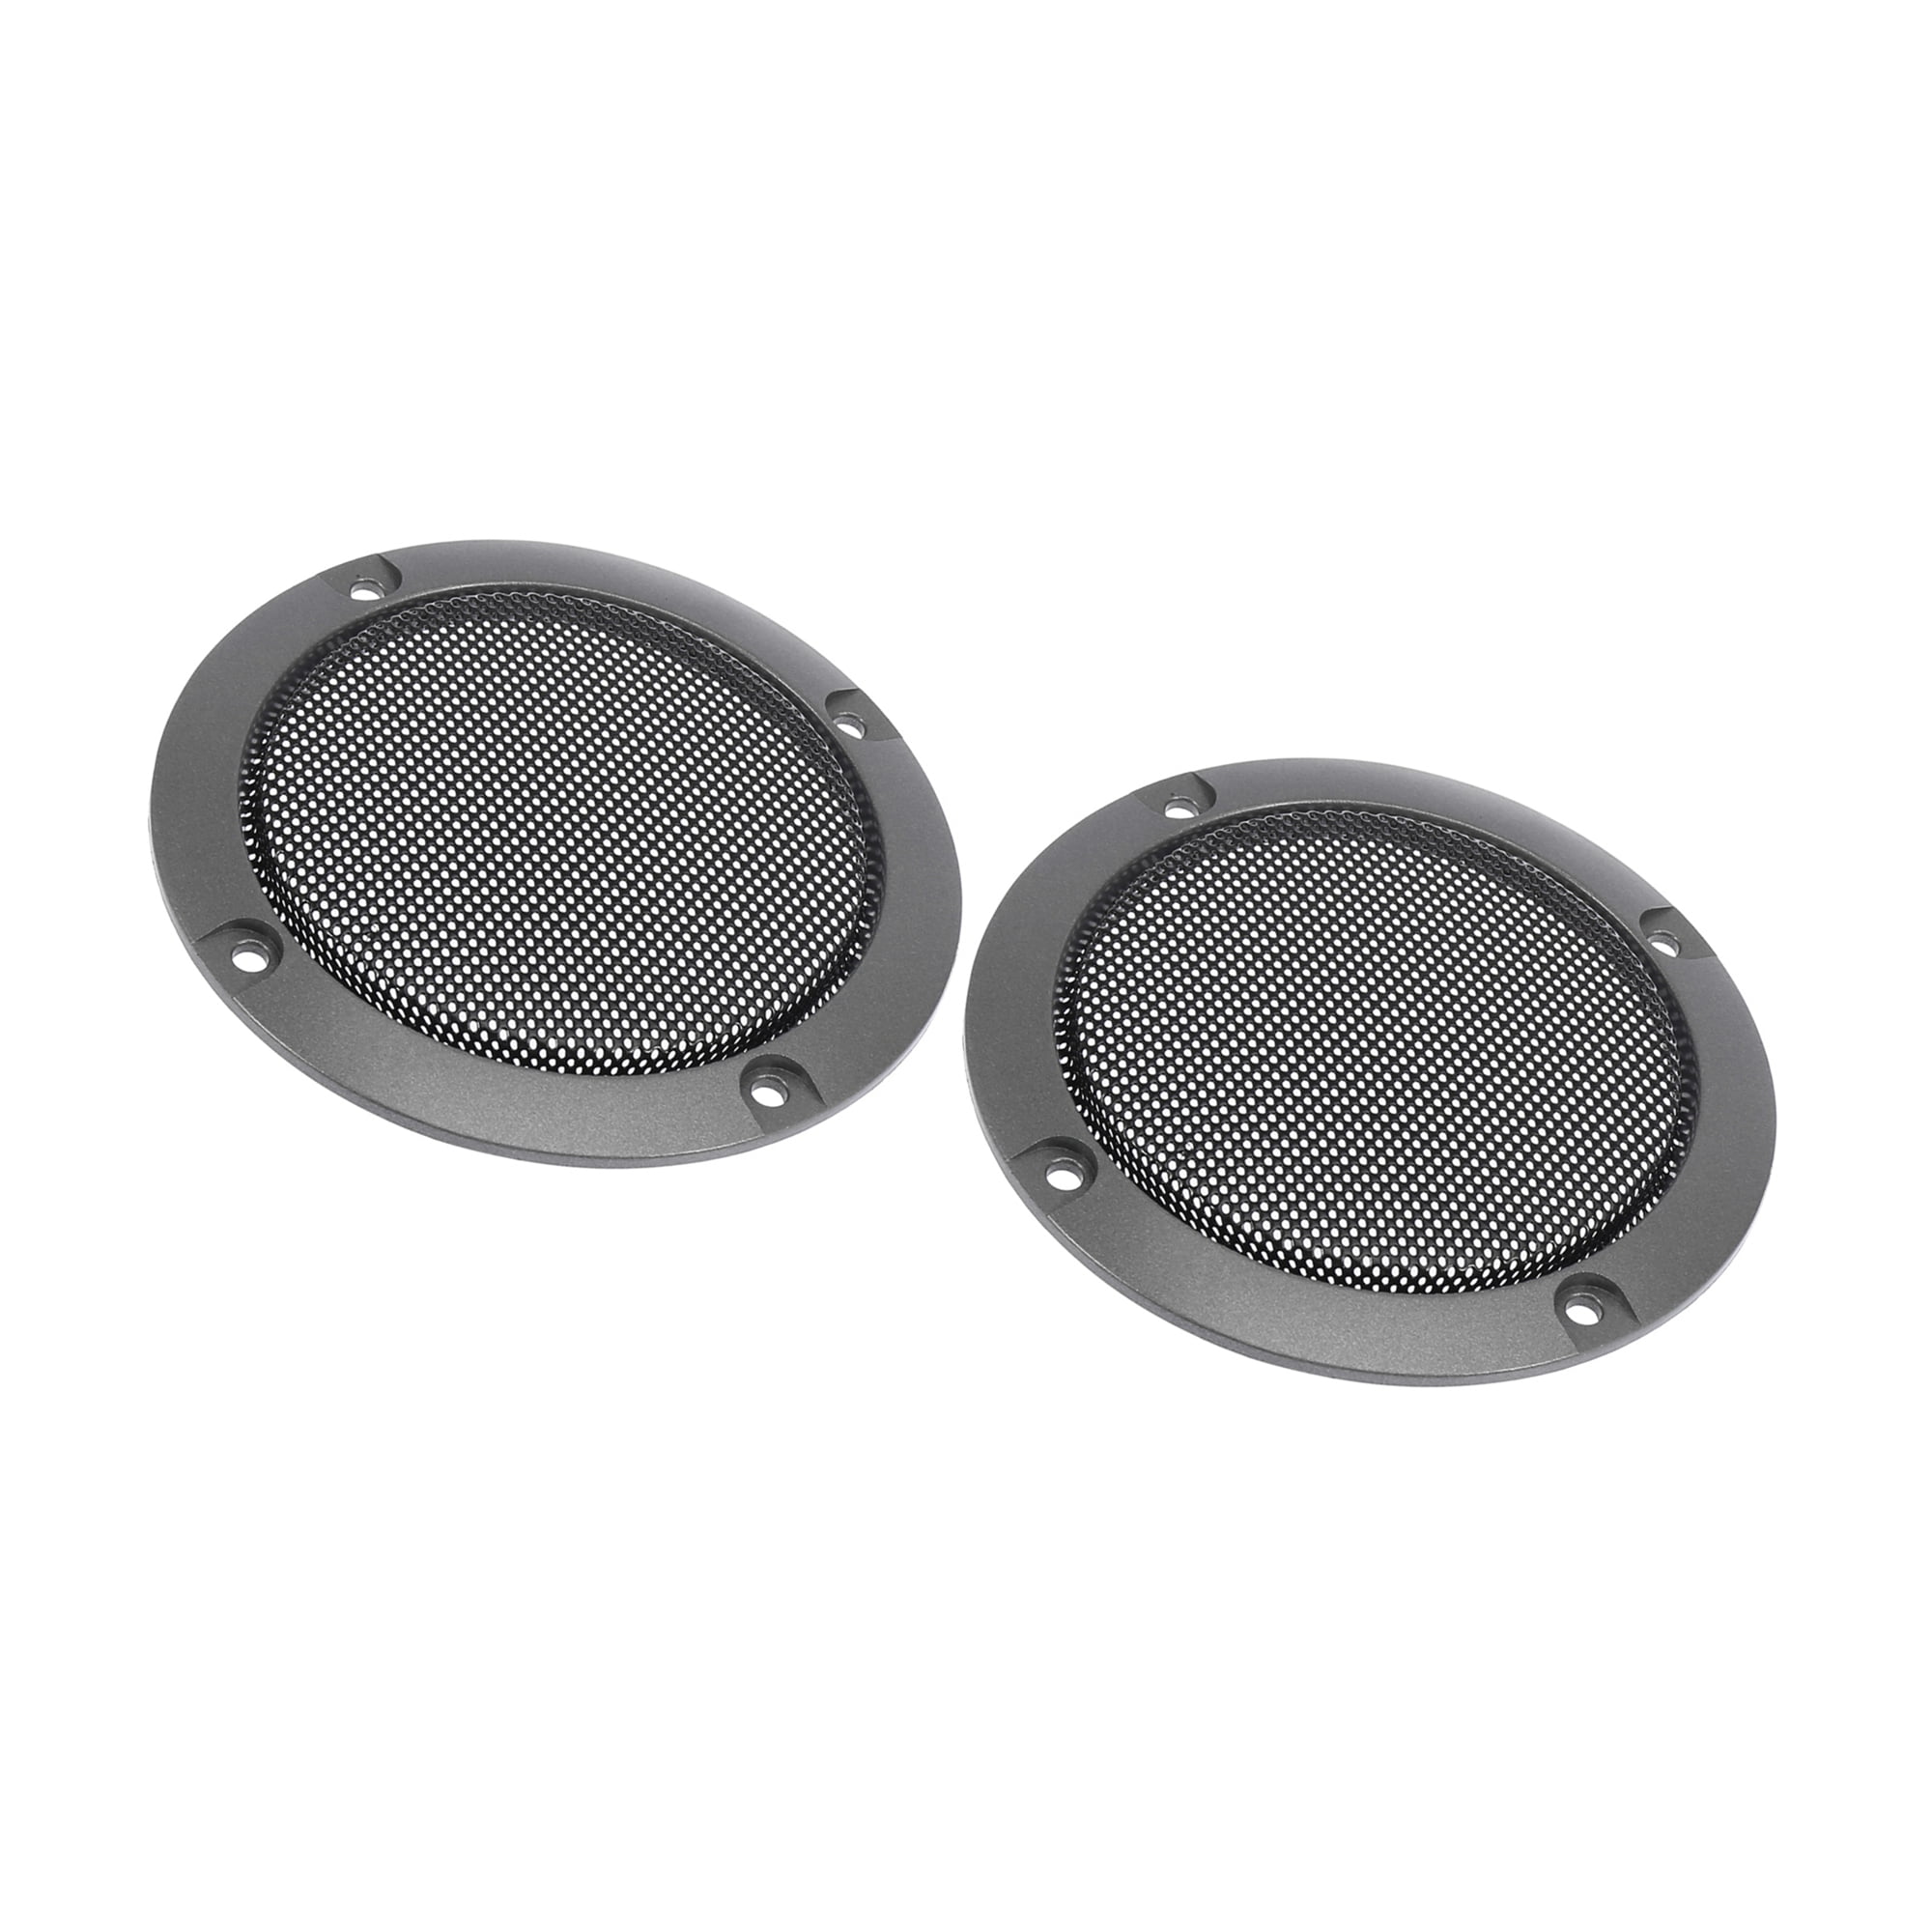 10 inch Bar Grill for Subwoofer and Speaker in Matte Black Finish Pair 2pcs 